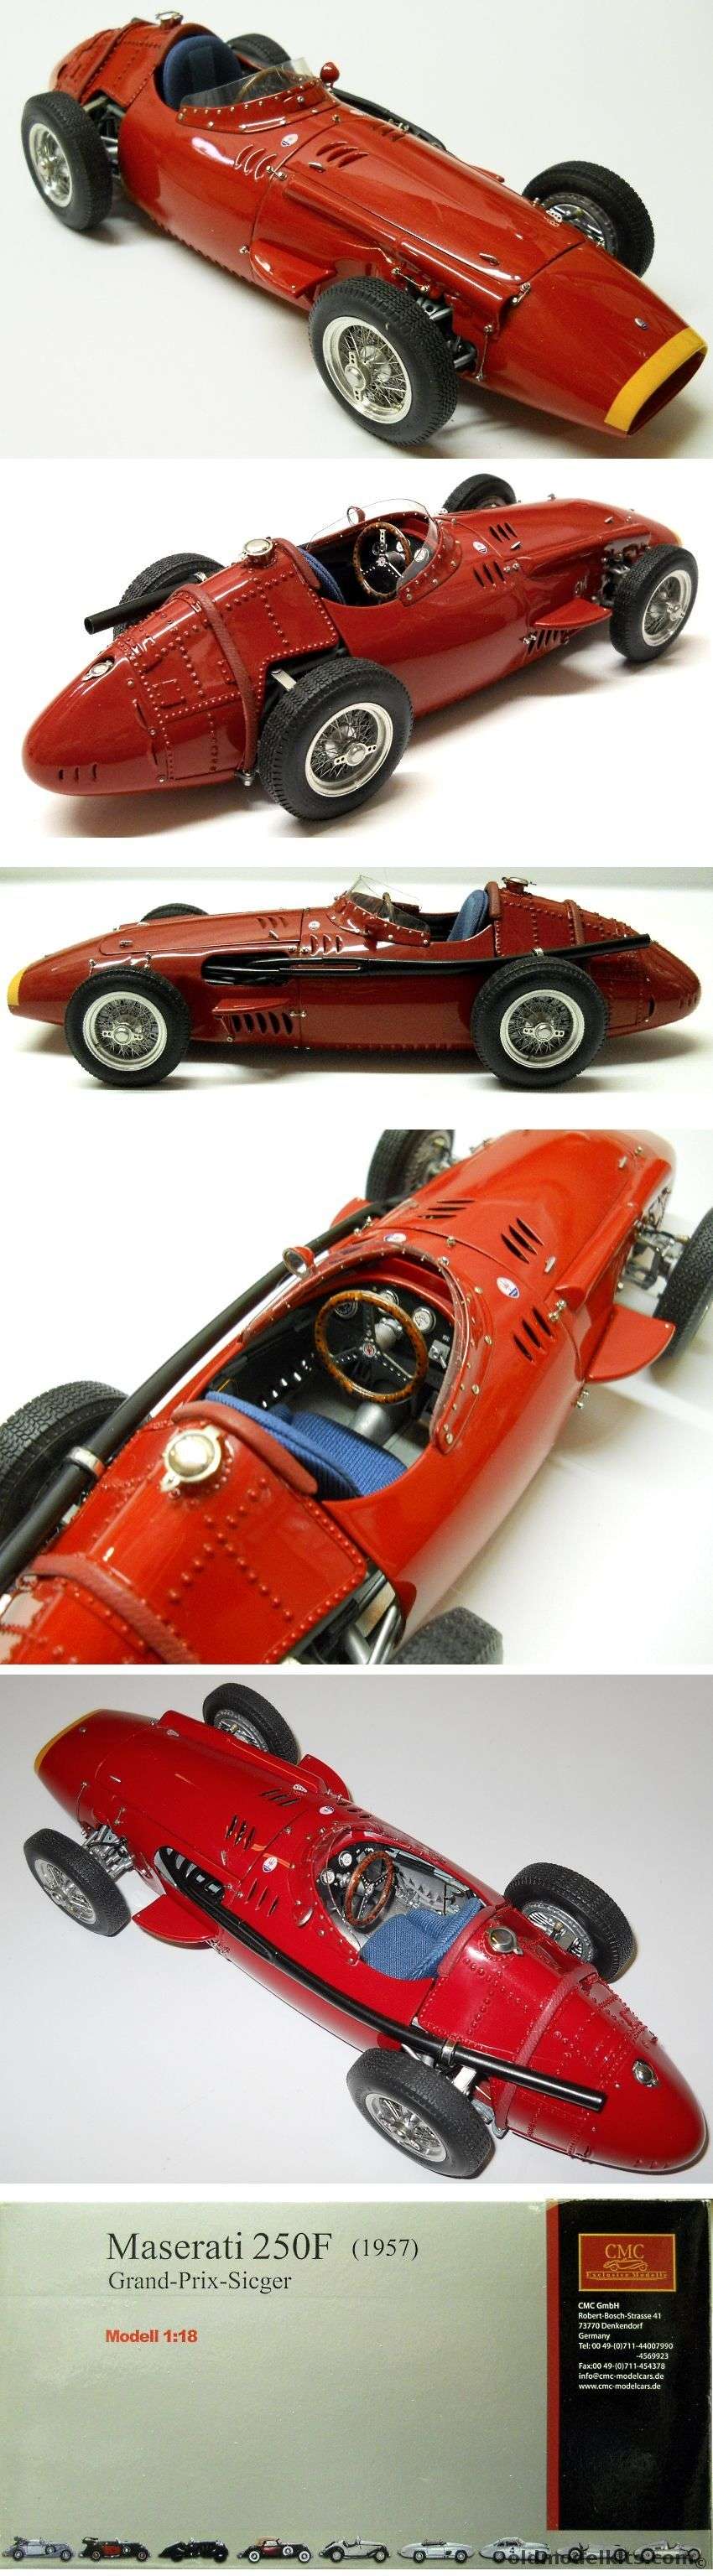 CMC 1/18 Maserati 250F 1957 Grand-Prix Sieger - Extremely Detailed Factory Built Display Model, M-051 plastic model kit